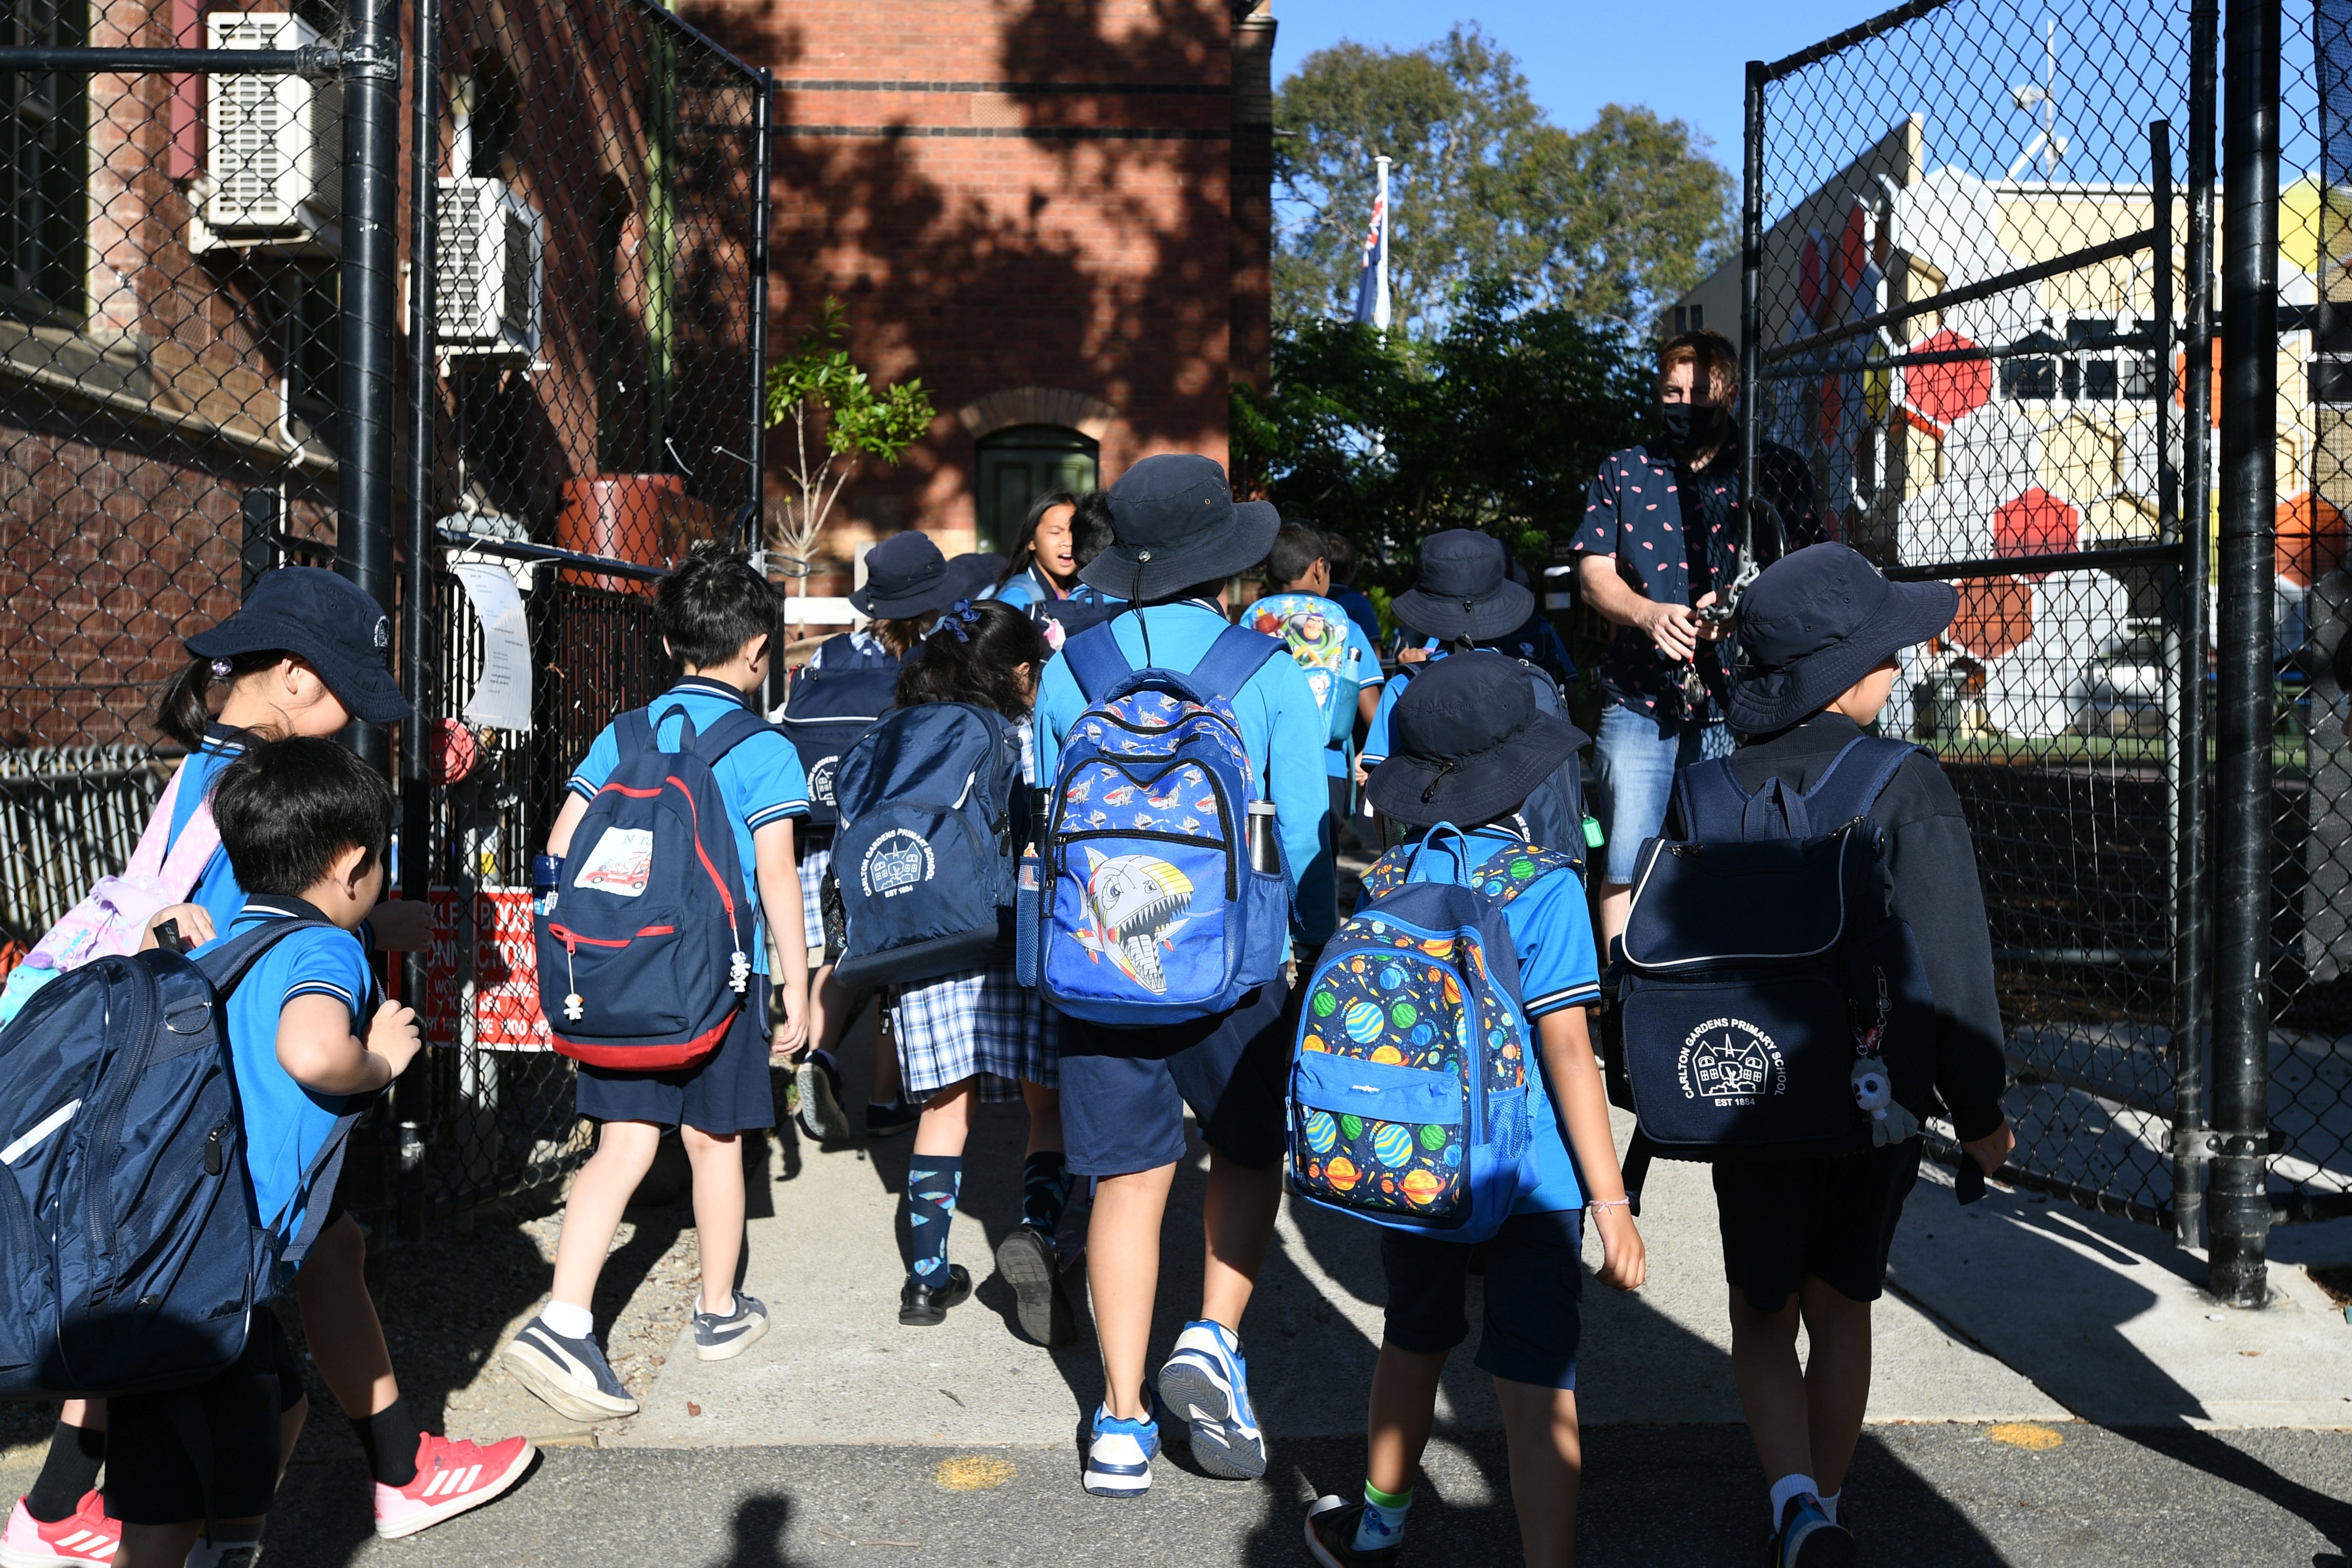 Students arrive to Carlton Gardens Primary school in Melbourne, Thursday, February 18, 2021. Victoria has recorded no new locally acquired coronavirus cases as life returns to COVID-normal after the state's five-day "circuit breaker" lockdown. (AAP Image/